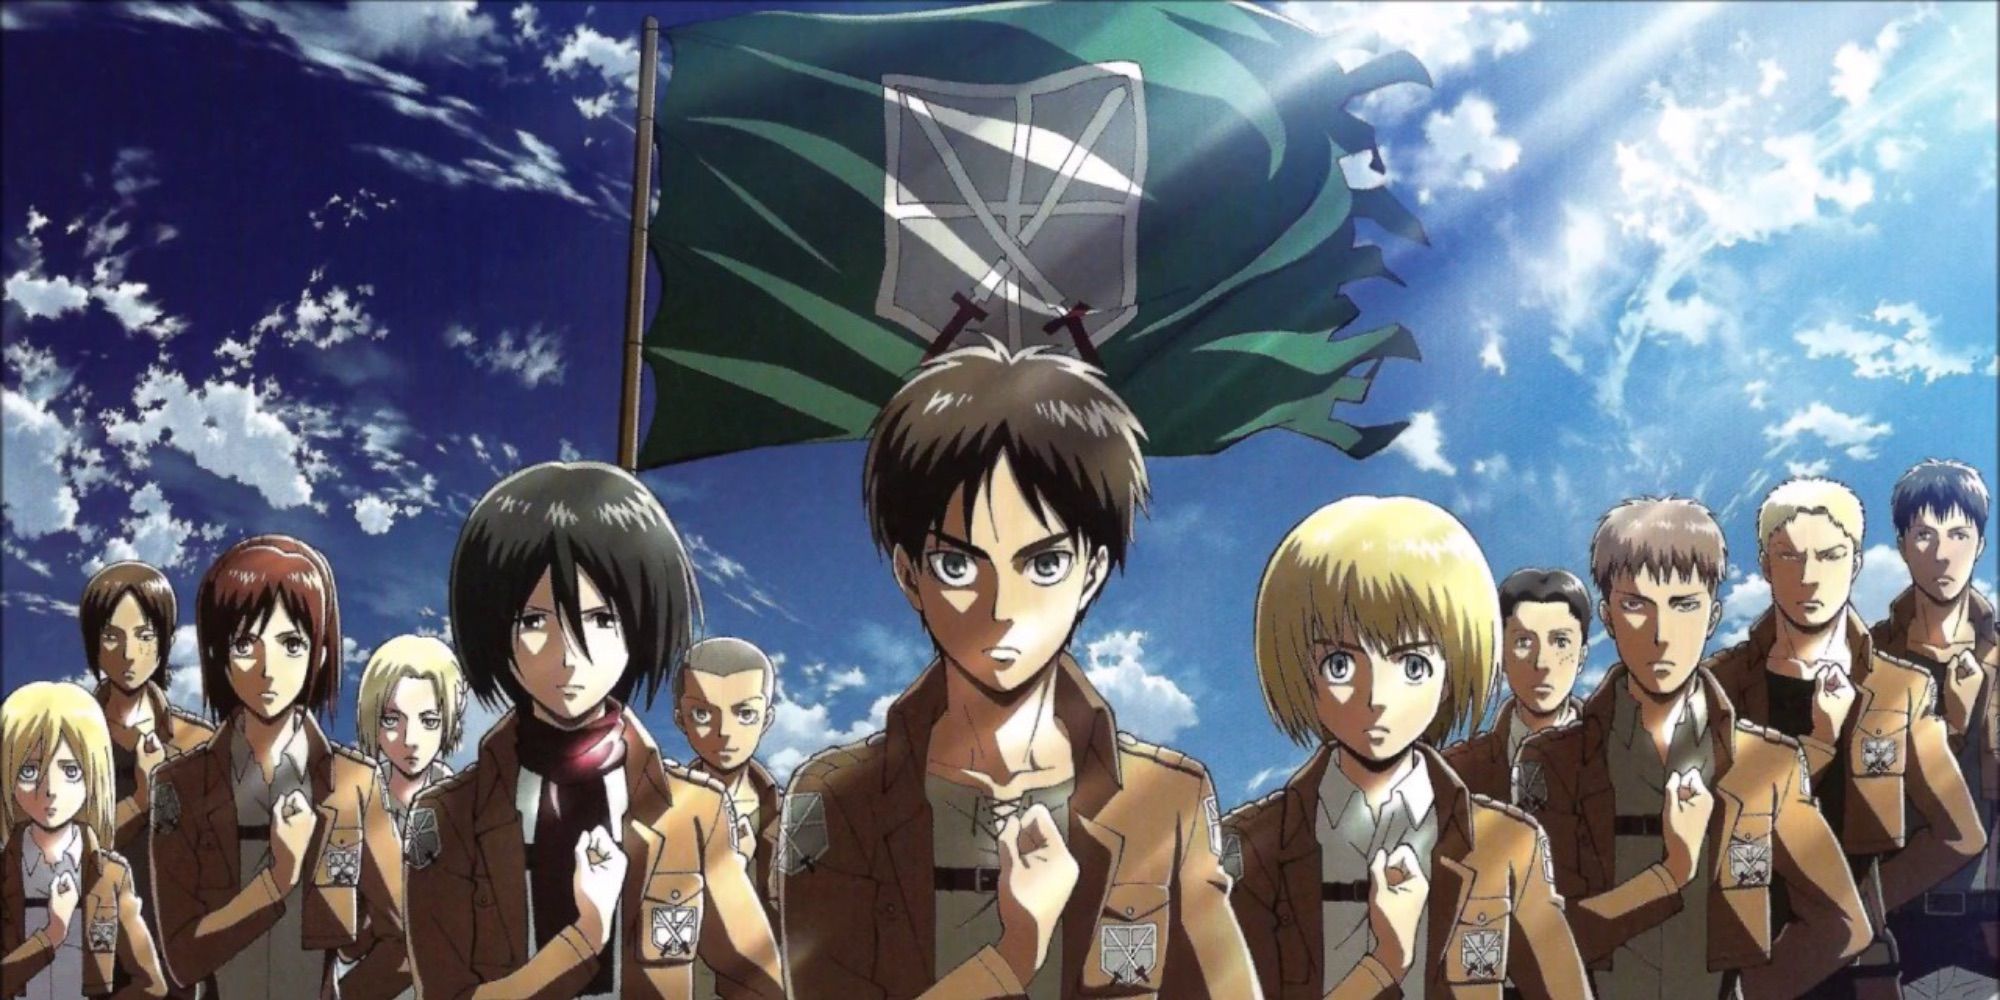 Attack on Titan Season 1 intro Scouts standing together